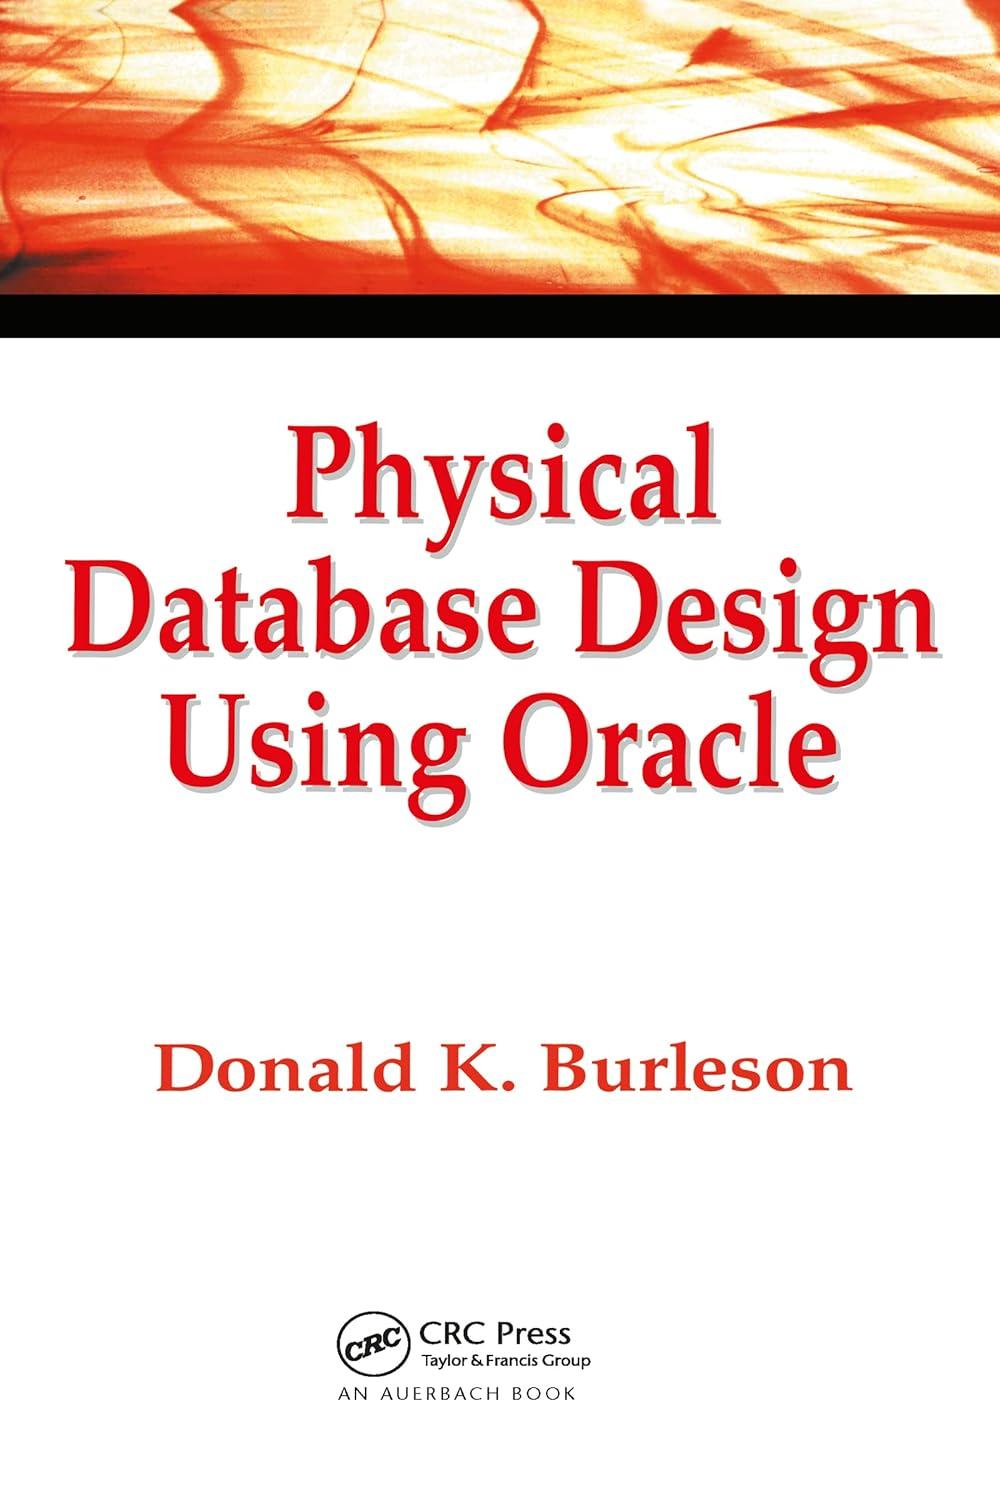 physical database design using oracle 1st edition donald k. burleson 0849318173, 978-0849318177